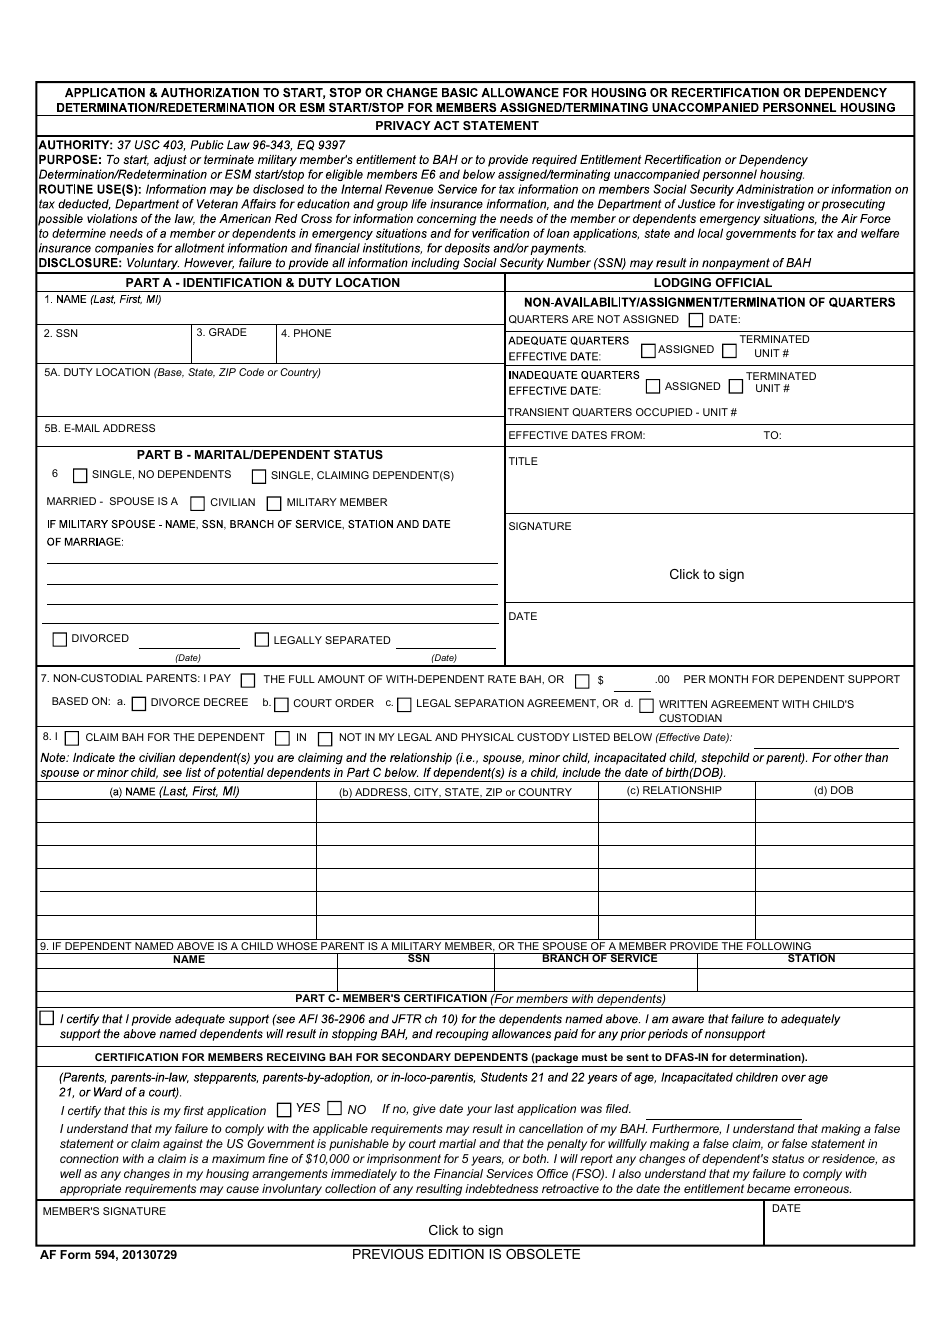 AF Form 594 Application and Authorization to Start, Stop or Change Basic Allowance for Quarters (BAQ) or Dependency Redetermination, Page 1